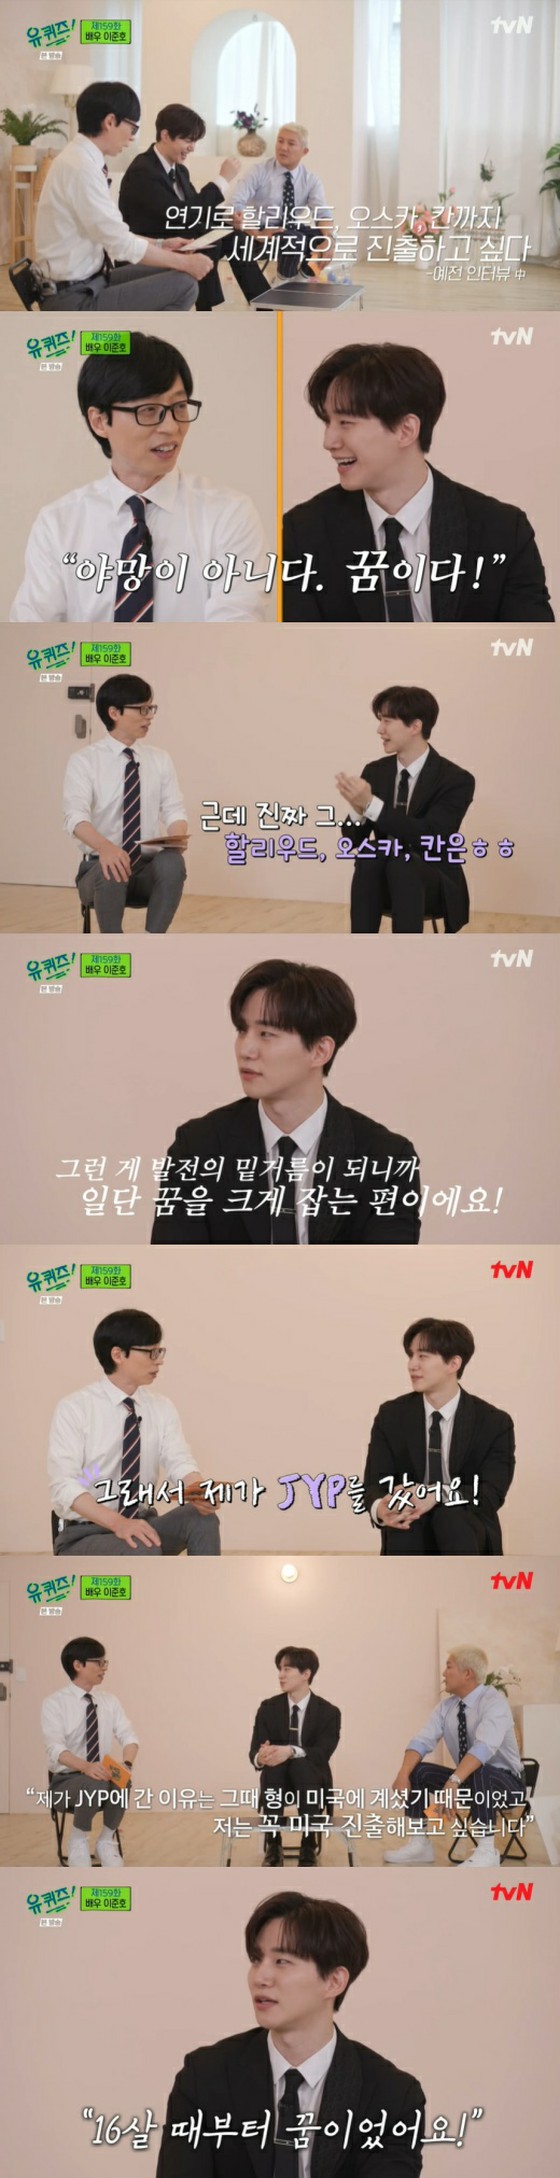 JUNHO (2PM), "Ambition JUNHO"'s dream is Hollywood ... "JYP dreaming to expand to the United States" = "You Quiz ON THE BLOCK"